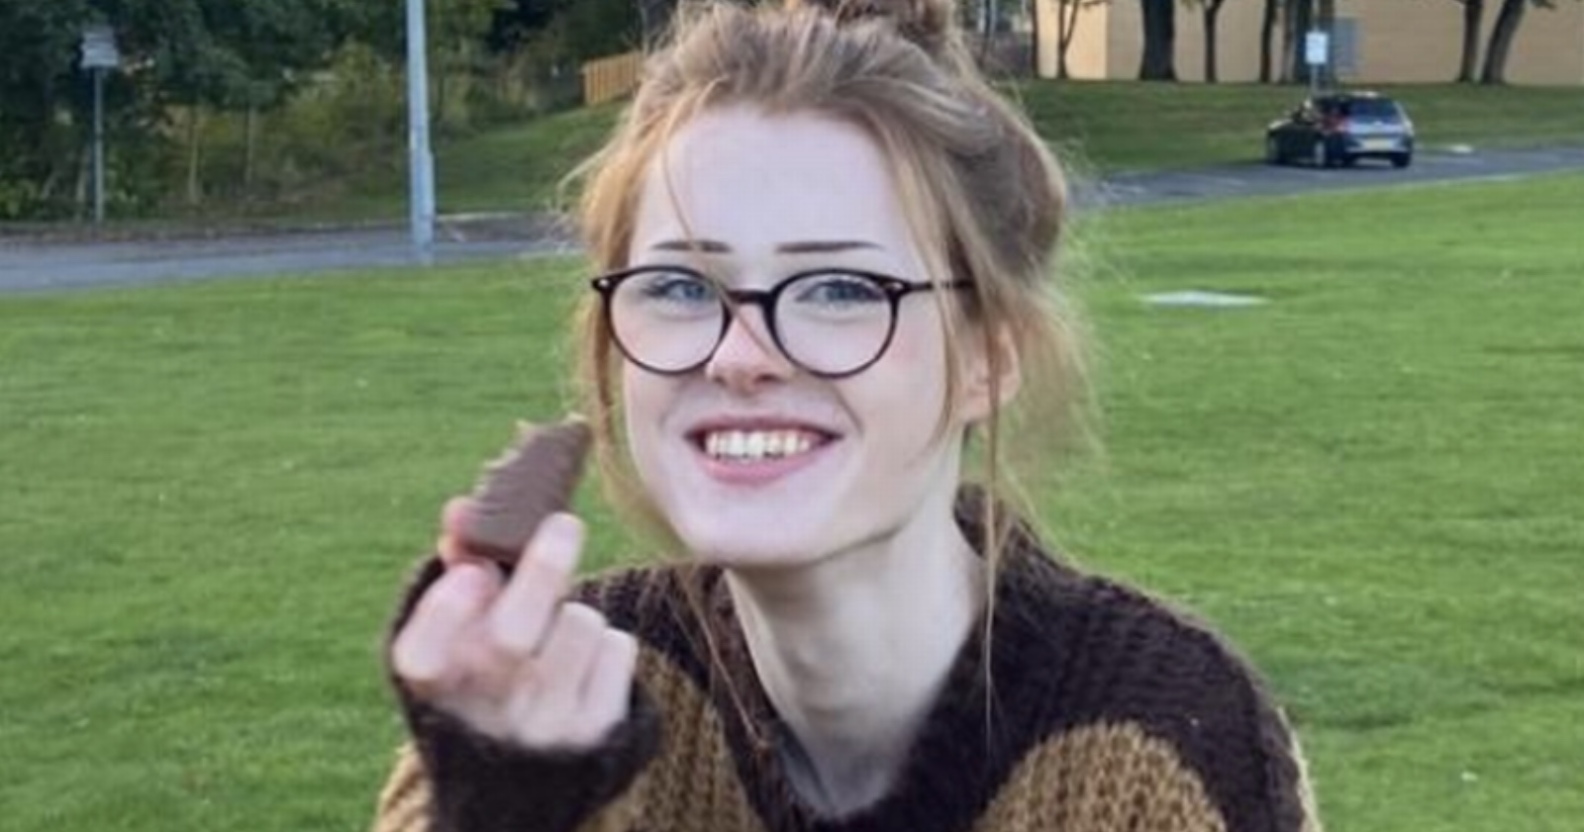 Brianna Ghey, the 16 year old transgender girl who has been murdered, in the photo she sits on a bench wearing a baggy jumper eating a chocolate bar and smiling